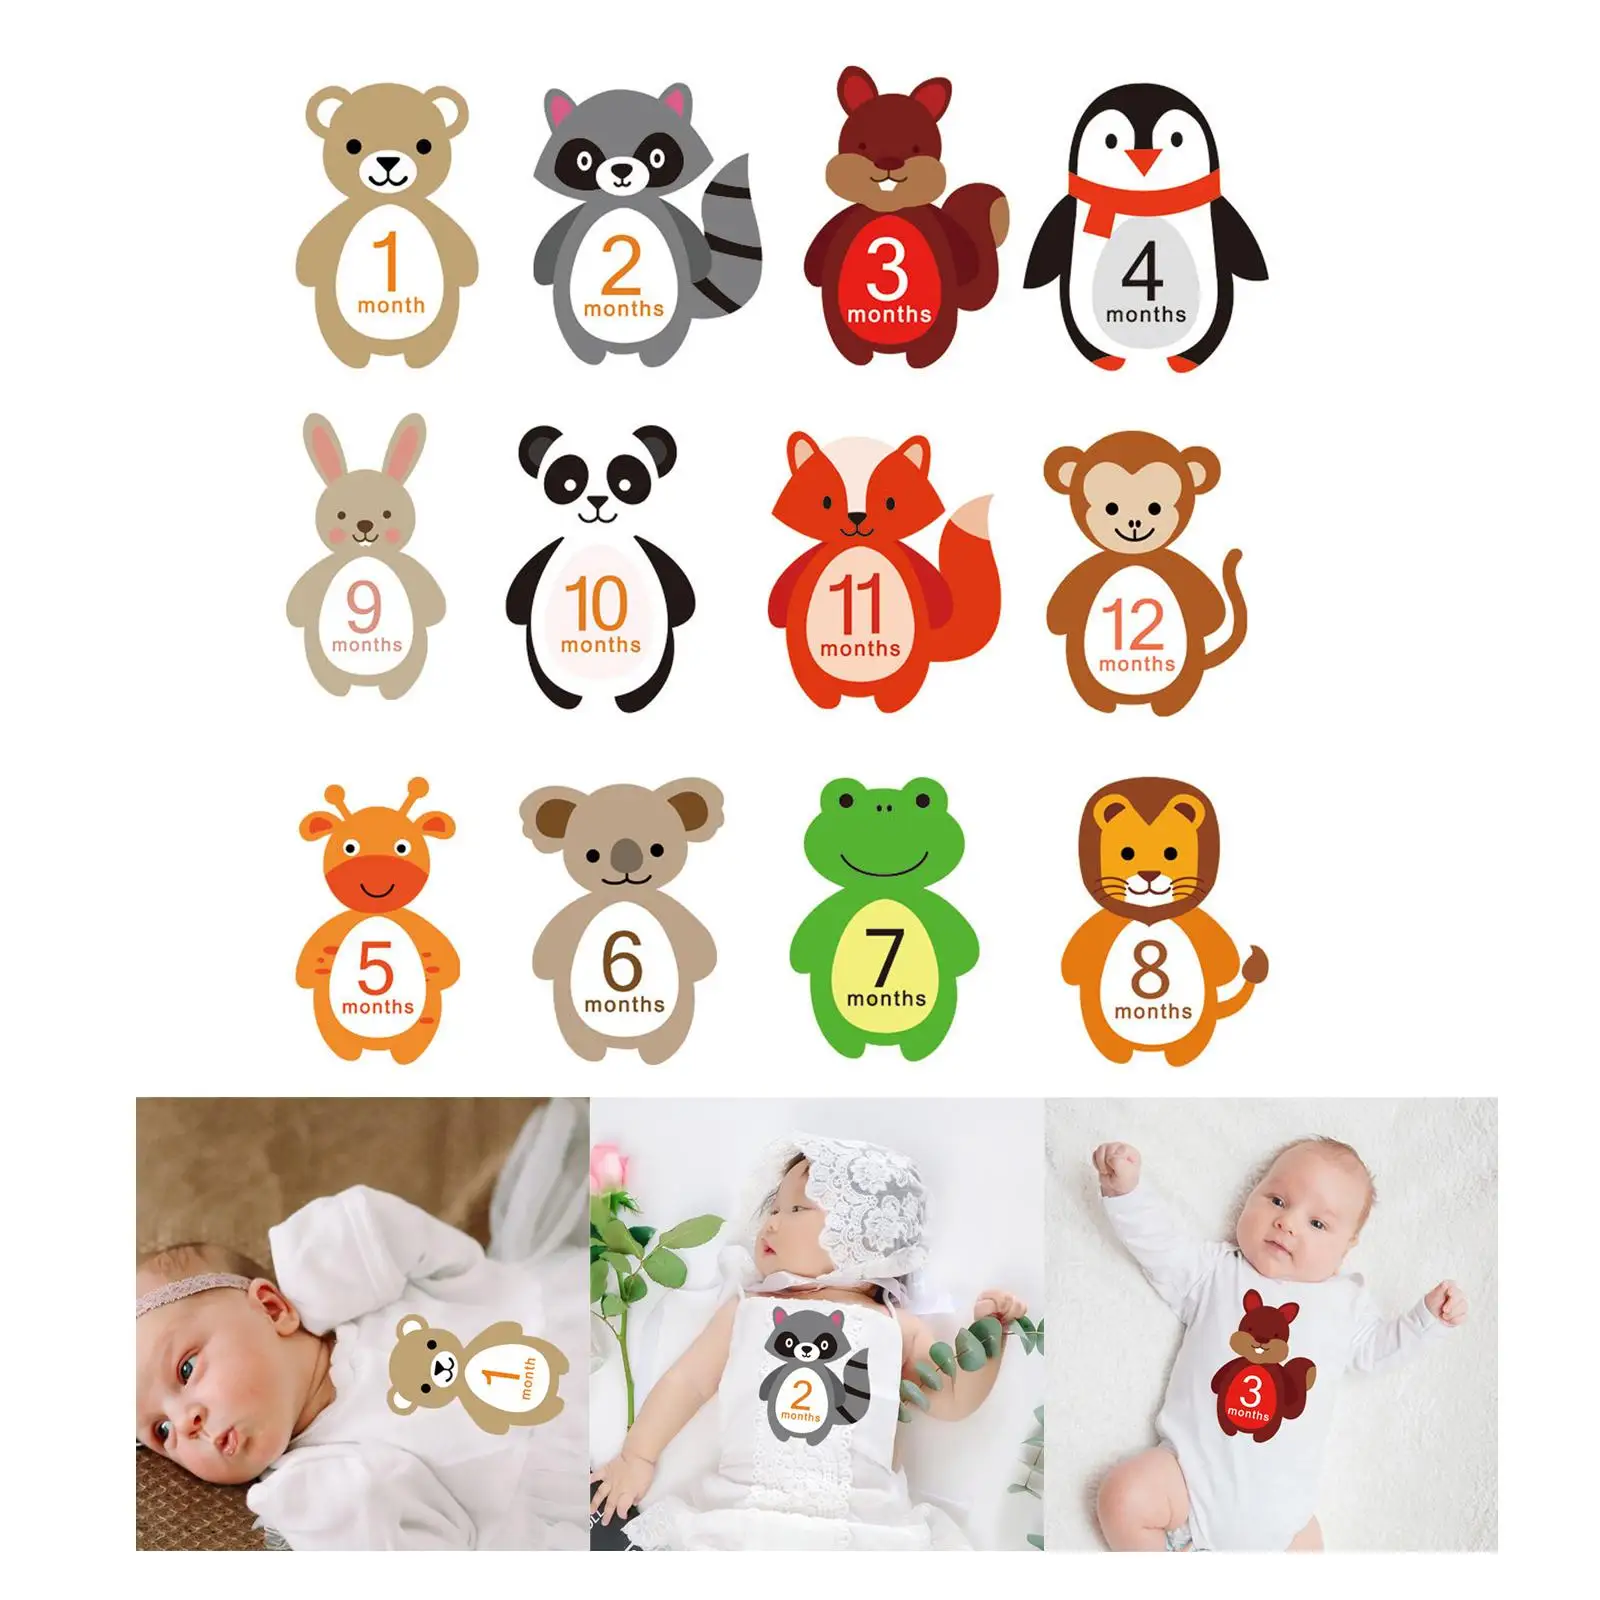 12 Pieces Bby Monthly Stickers Crtoon niml Shped Milestone Stickers Gender Neutrl 1-12 Month Posing Props Bby Shower